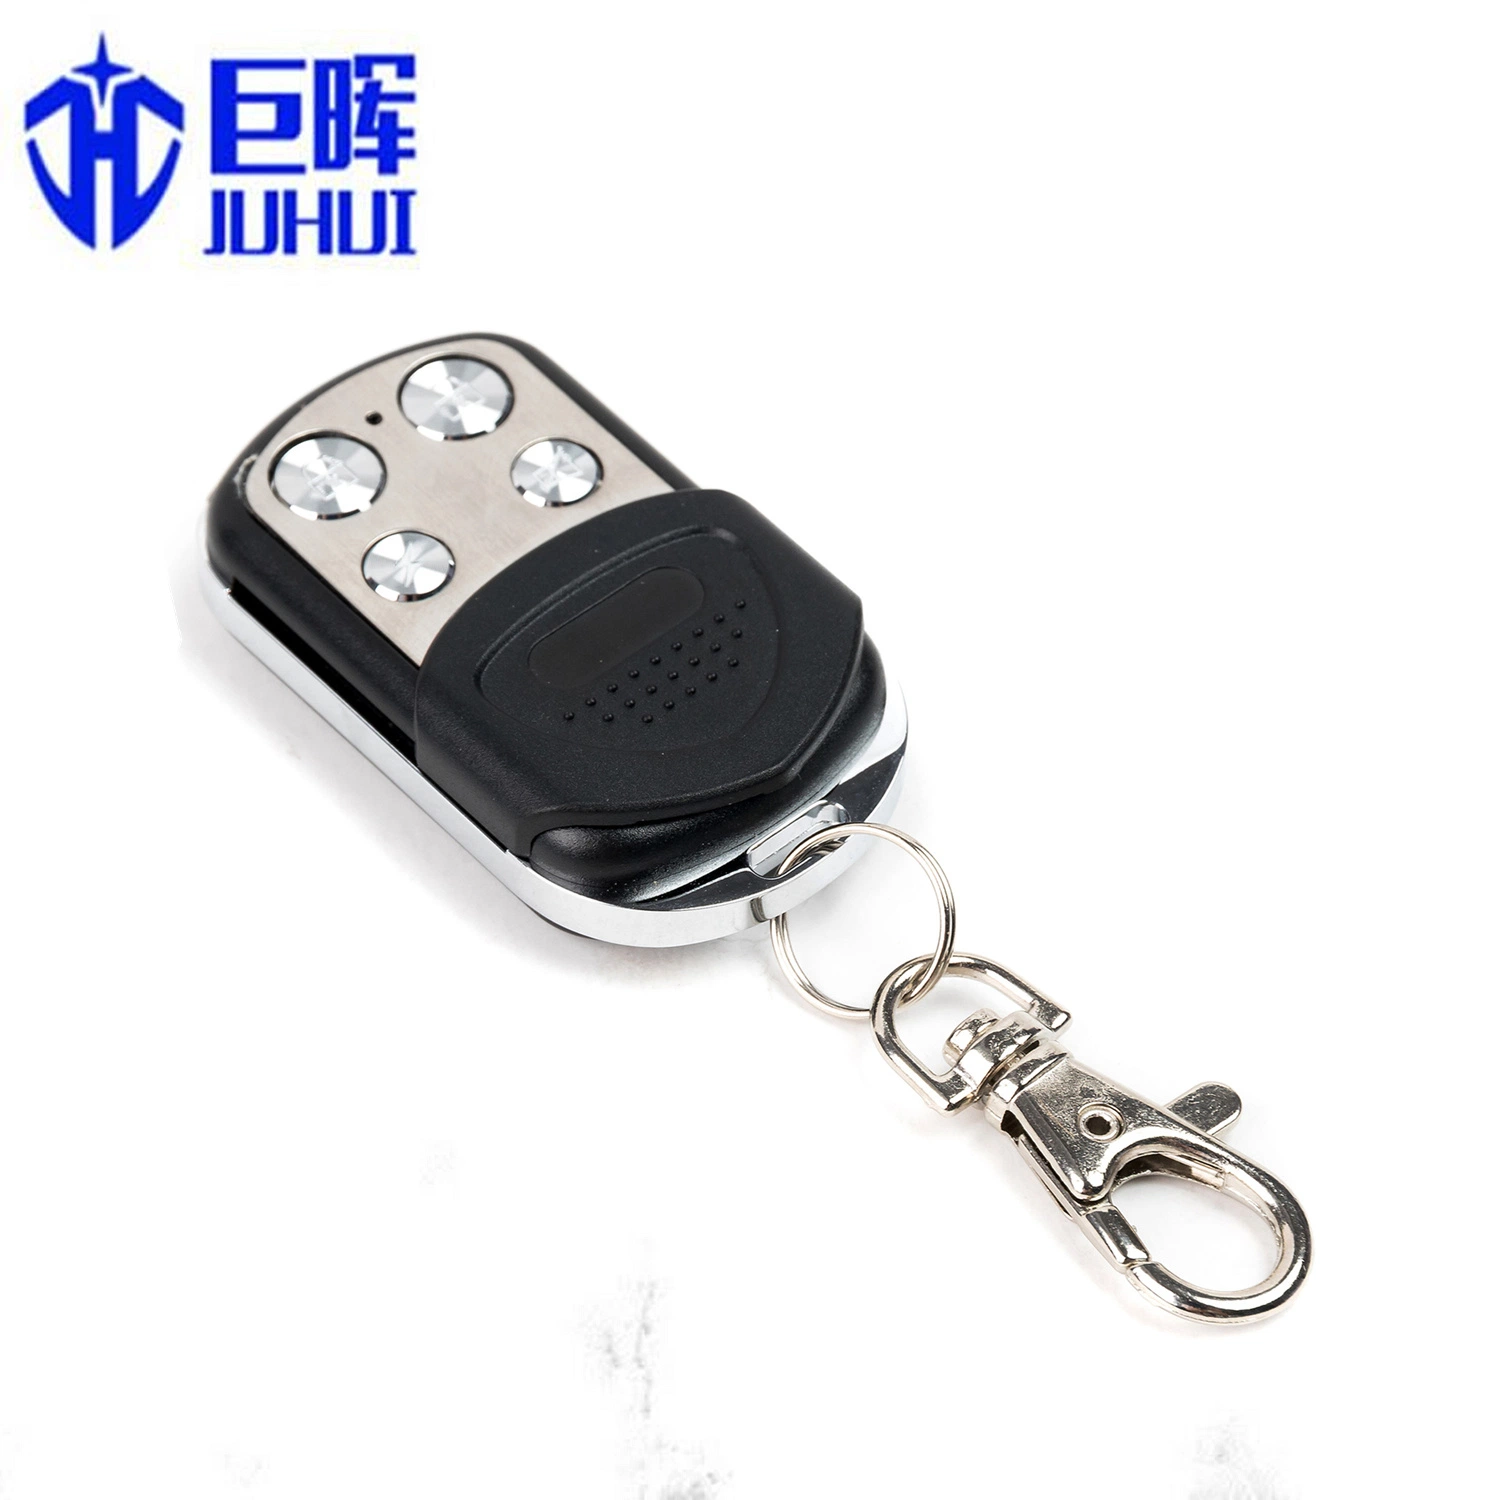 Colorful 433.92MHz Waterproof Universal Transmitter Remote